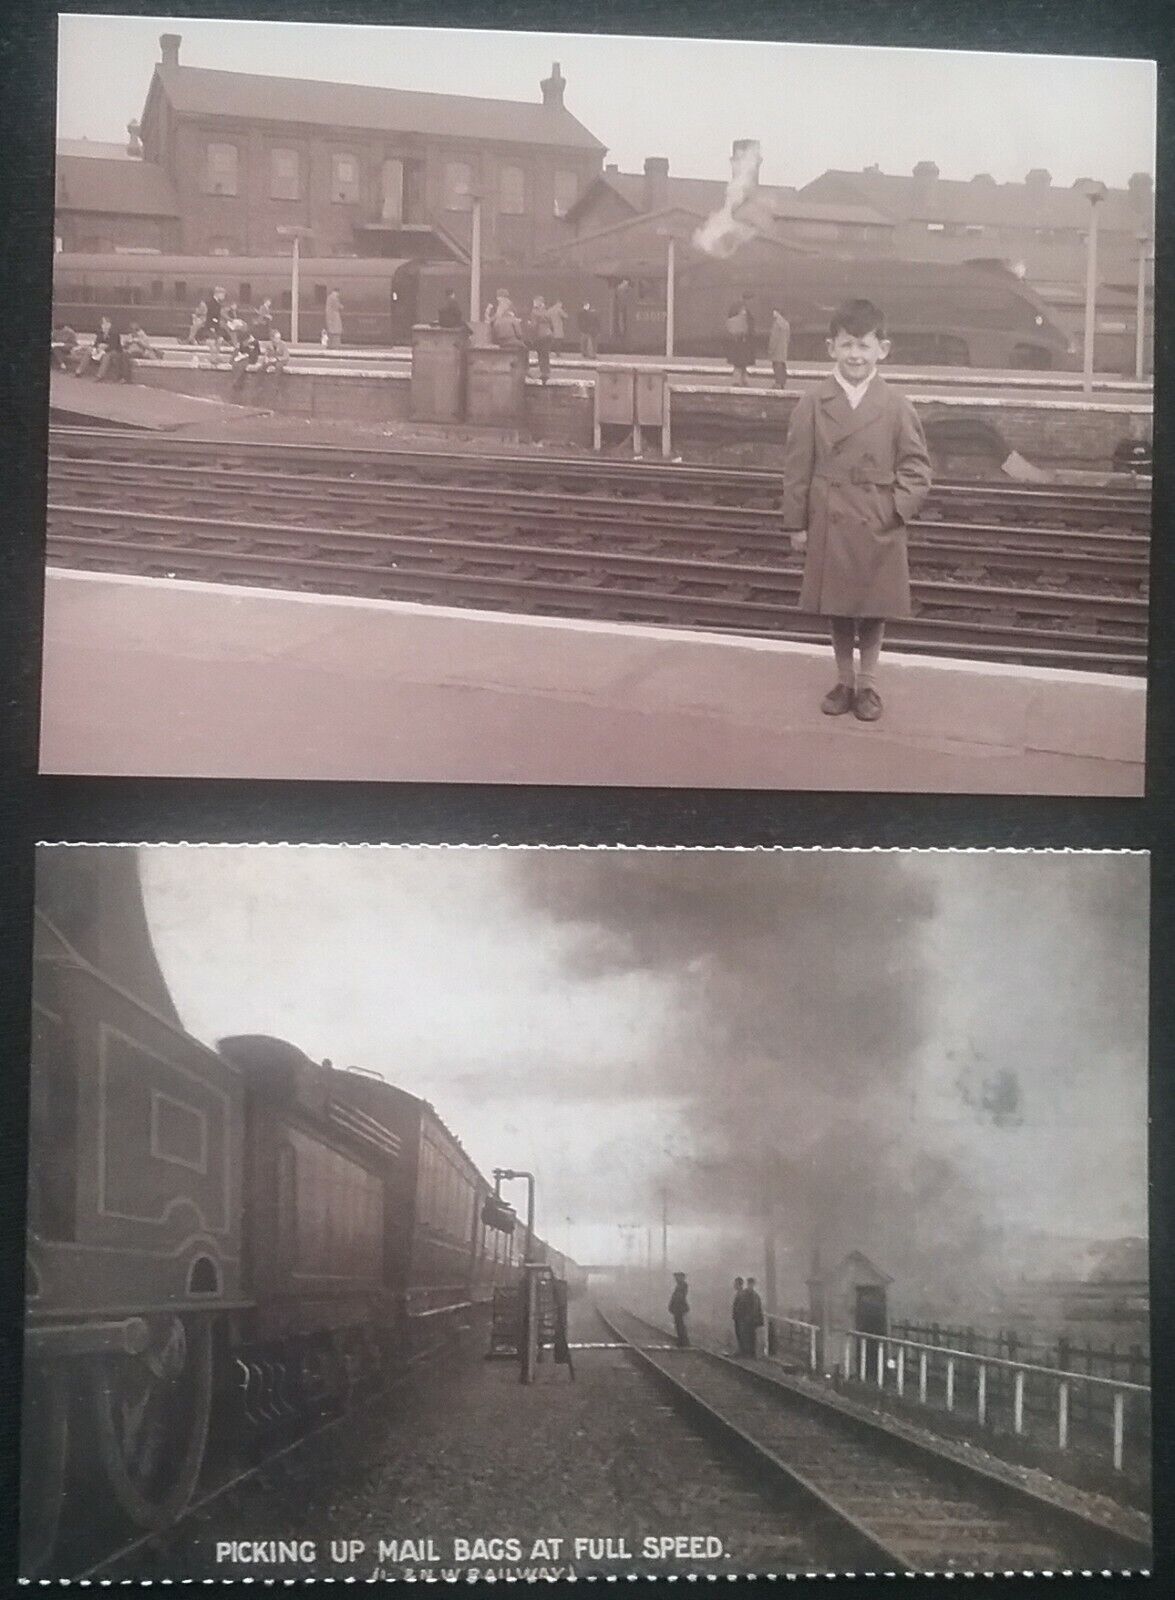 2 POSTCARD SIZE CARD PHOTO'S OF RAILWAY'S , 2 VINTAGE PHOTO'S ON 1 & 1 ON OTHER